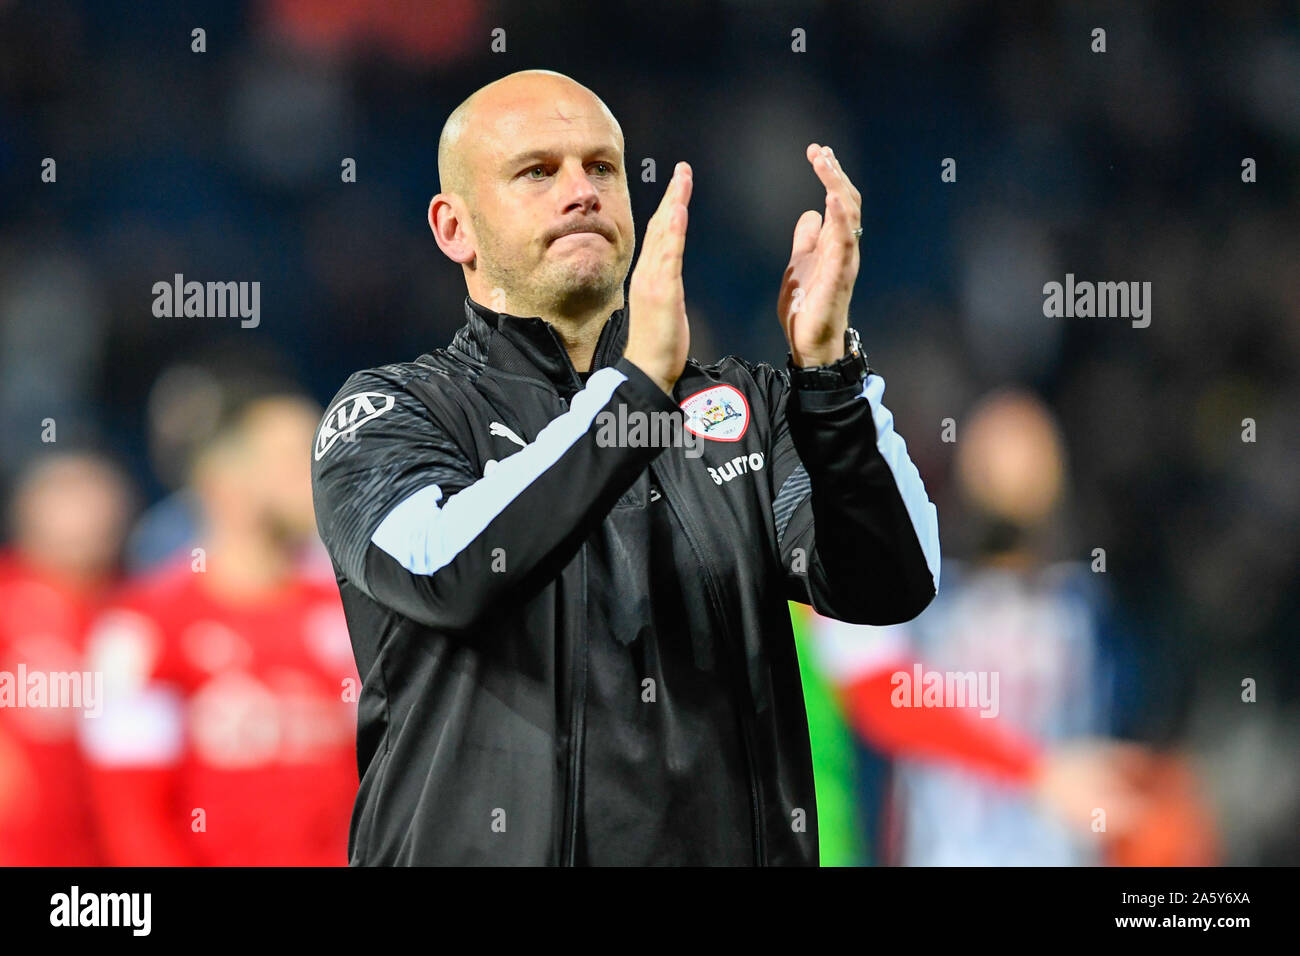 22nd October 2019, The Hawthorns, West Bromwich, England; Sky Bet Championship, West Bromwich Albion v Barnsley : Barnsley Caretaker Head Coach, Adam Murray applauds the travelling supporters after his side drew 2-2 with West Bromwich Albion Credit: Simon Whitehead/News Images Stock Photo